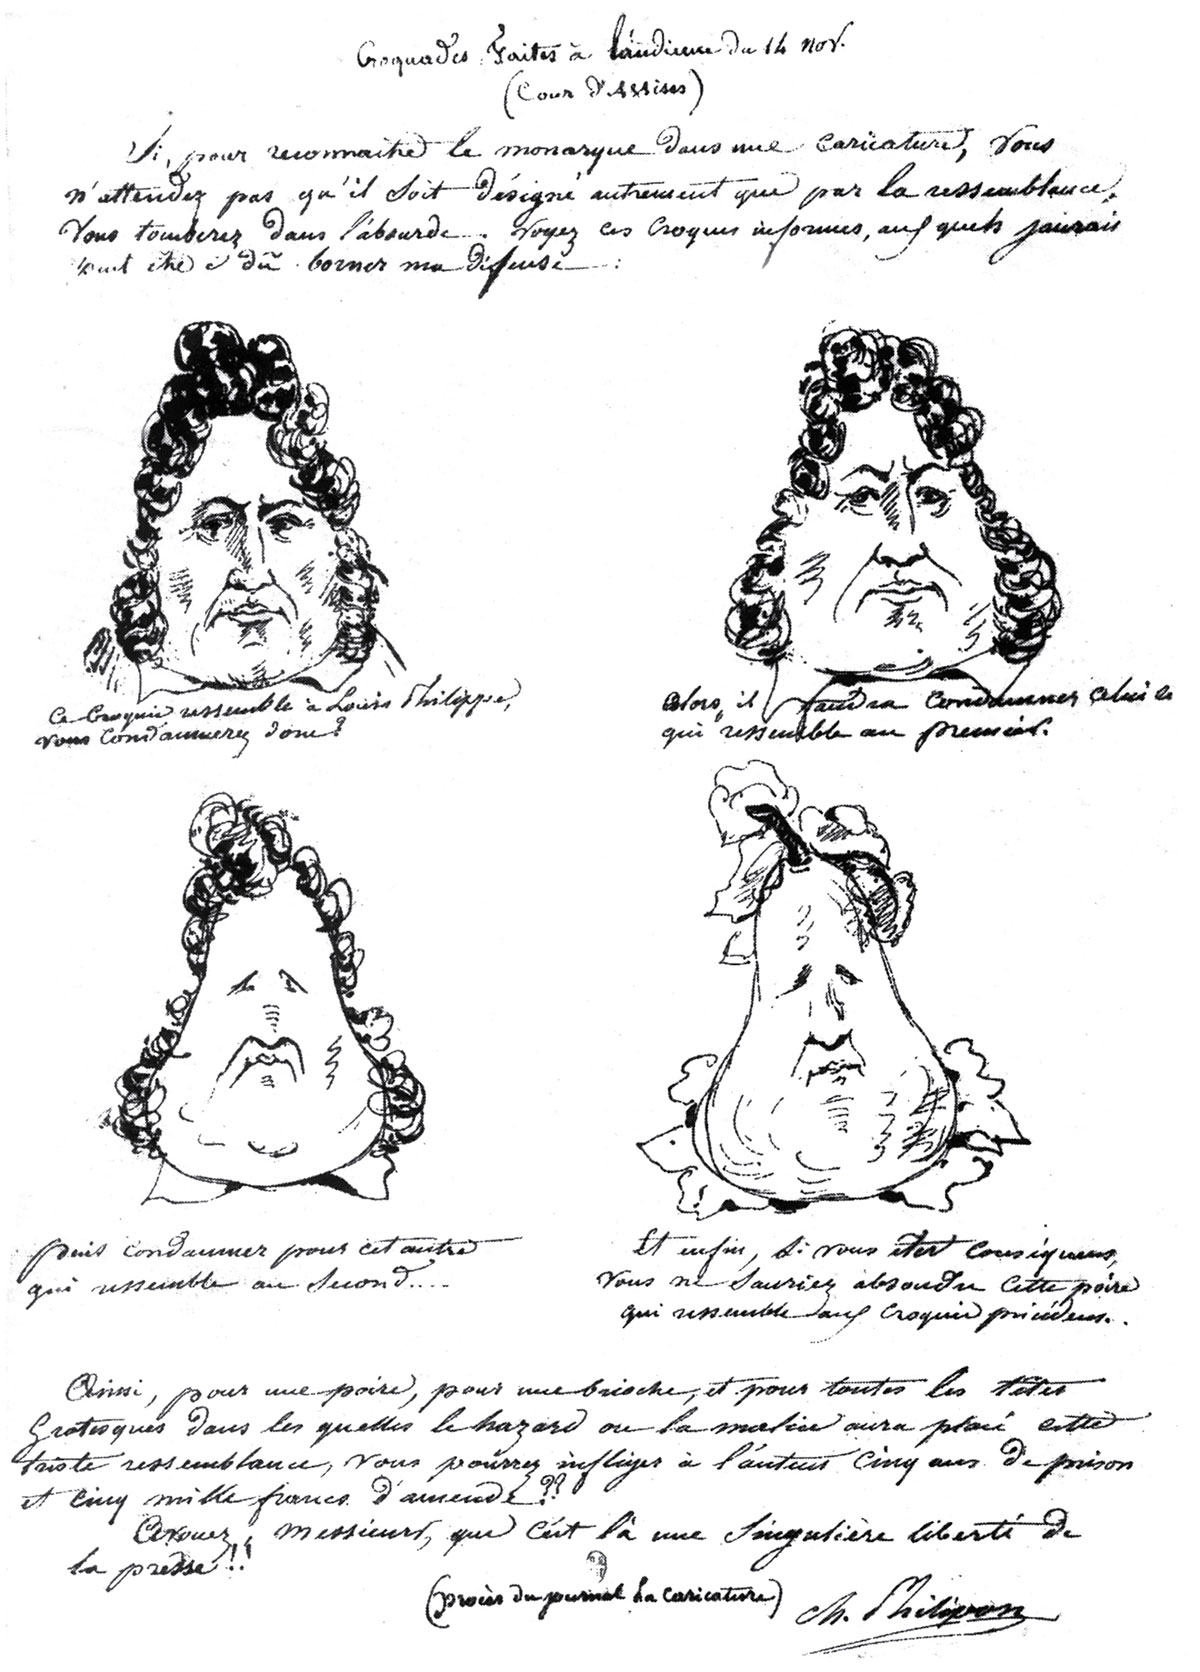 An 1831 sketch made by Charles Philipon in court. The sketch shows King Louis Philippe’s head gradually becoming a pear.